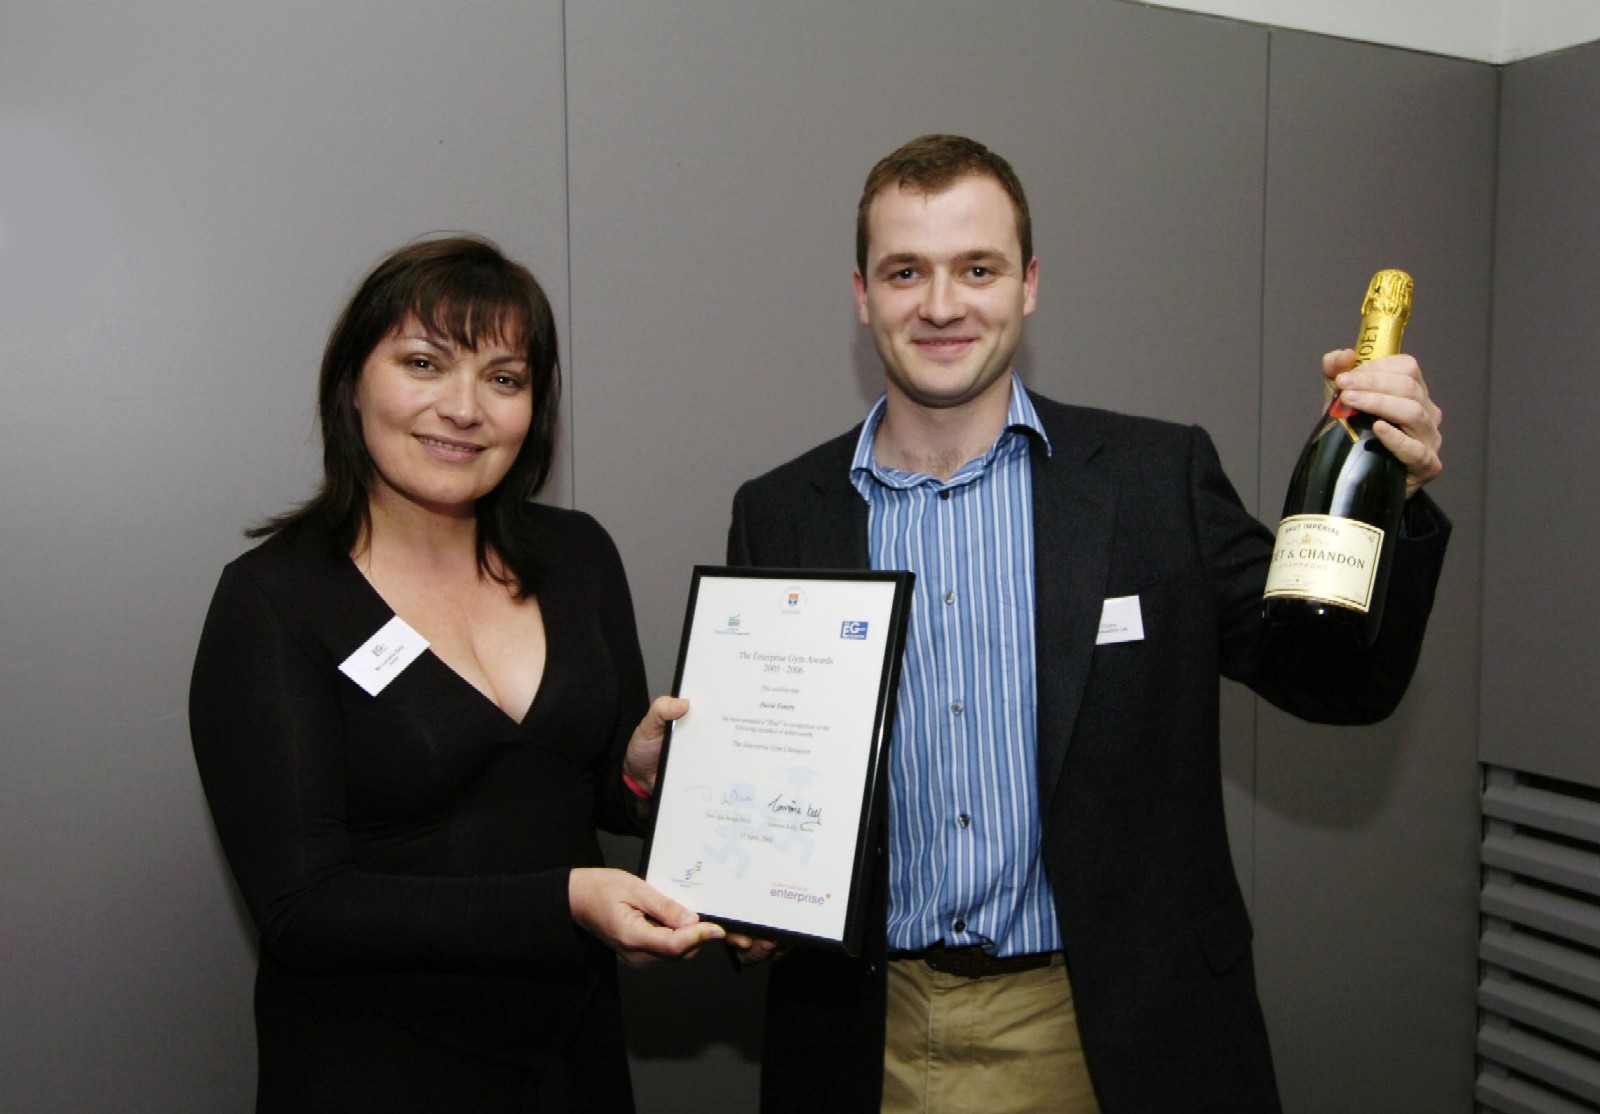 photo of Lorraine Kelly presenting awards to students who have proved their business potential